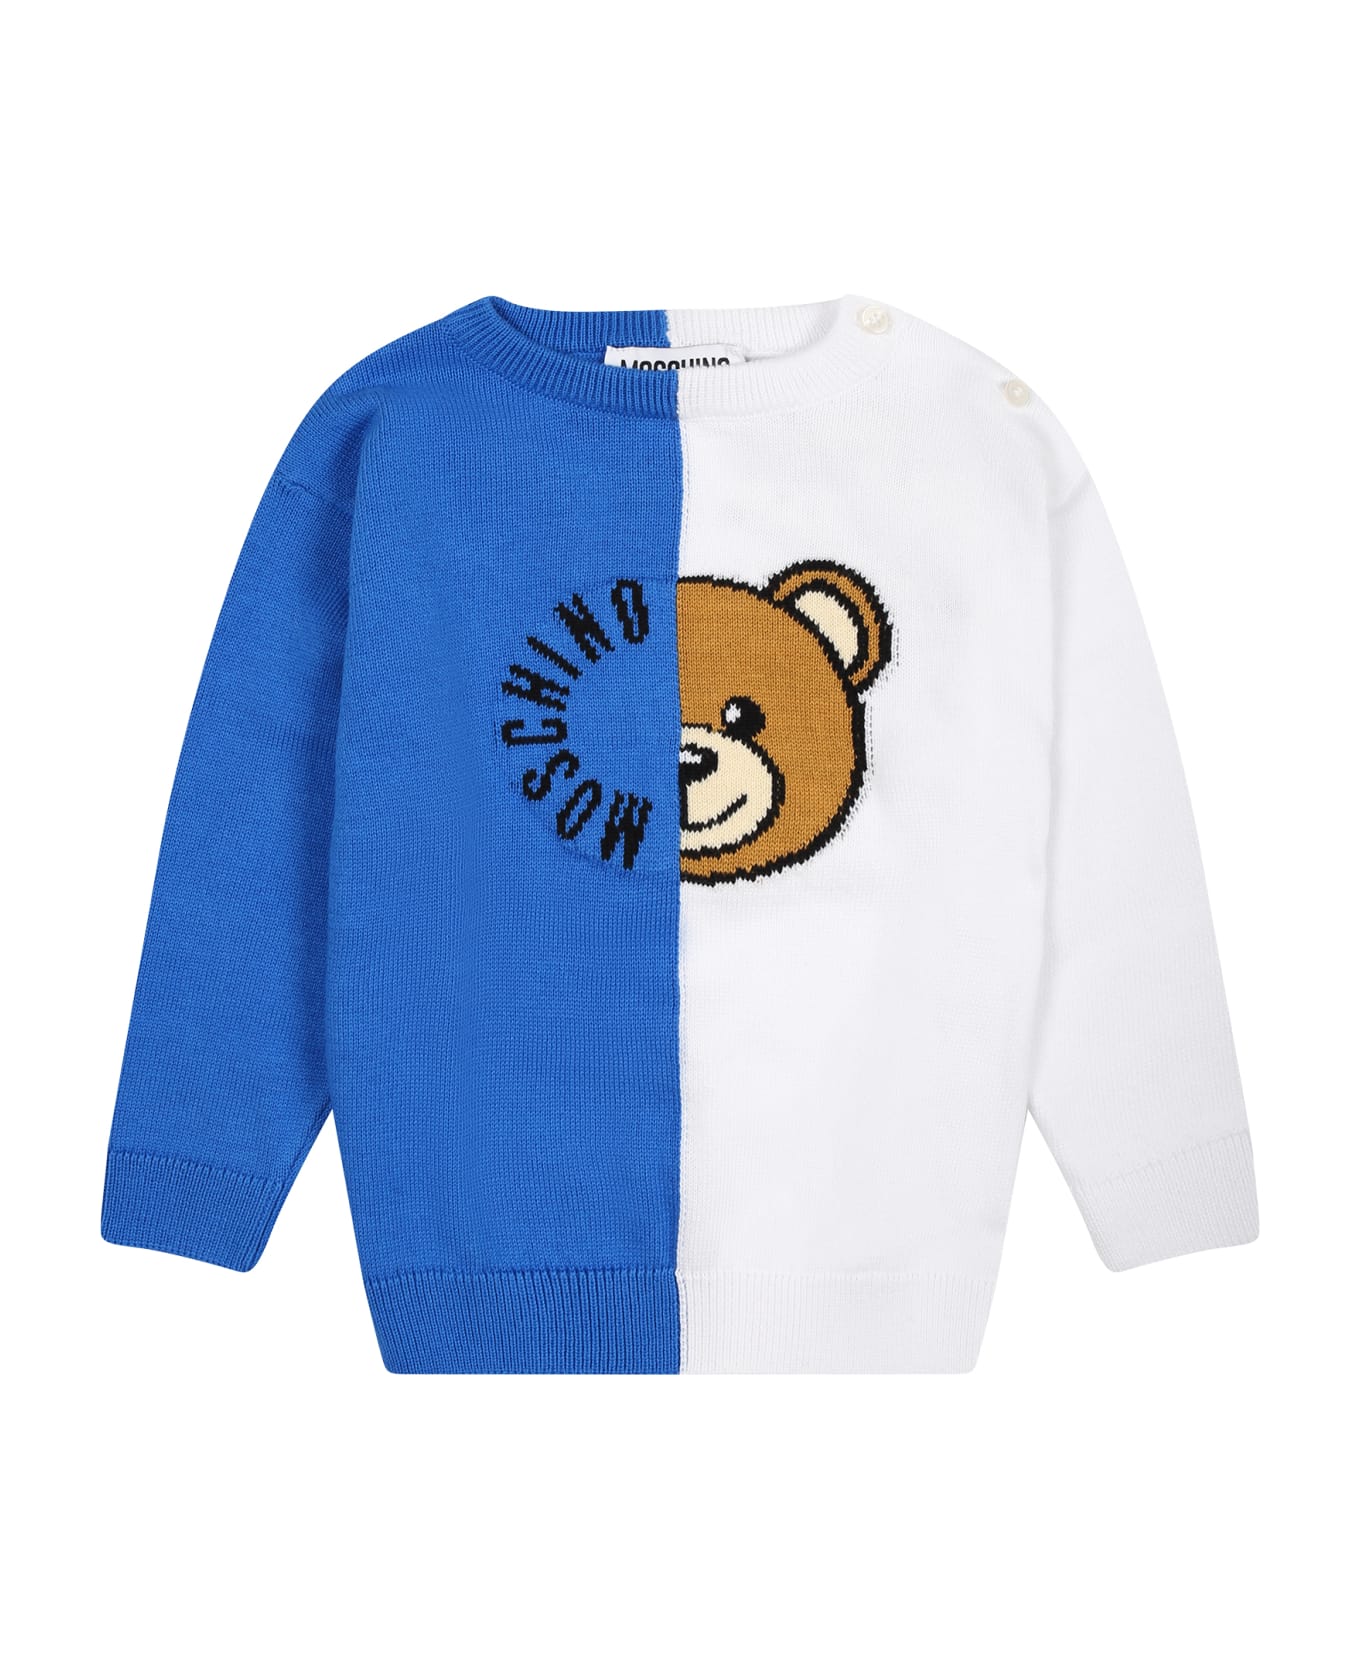 Moschino Multicolor Sweater For Baby Boy With Teddy Bear - Multicolor